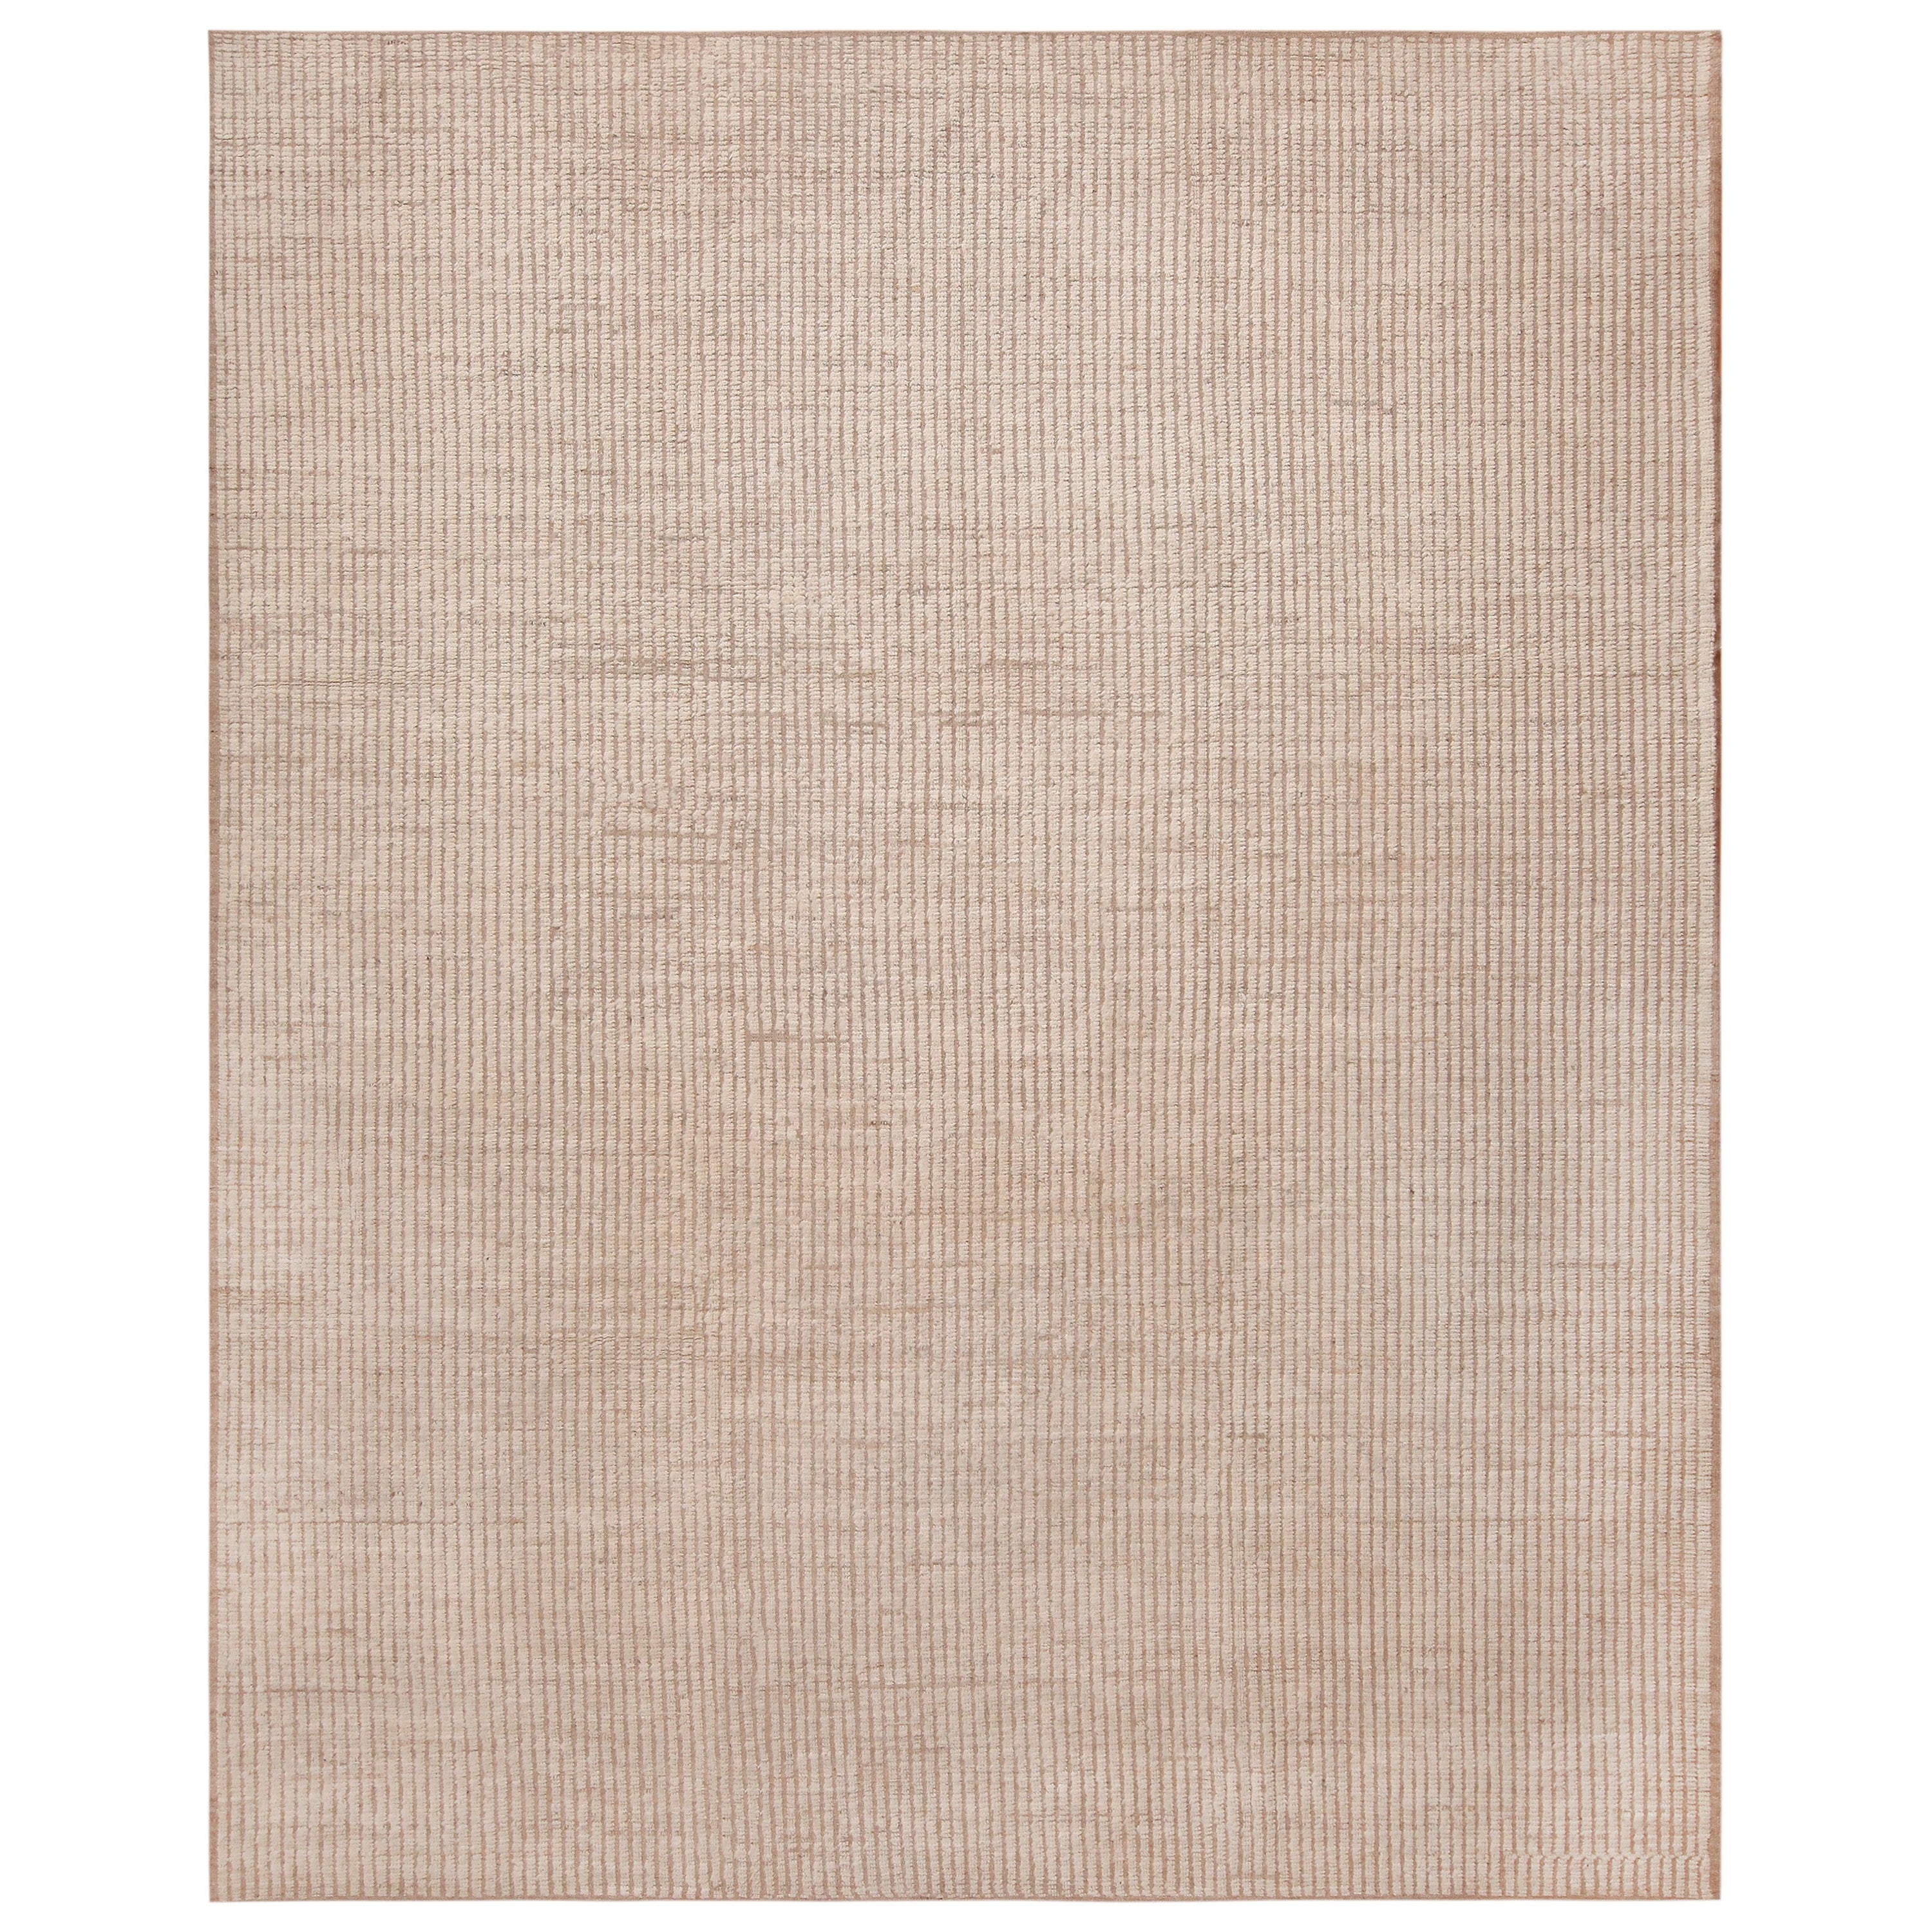 Nazmiyal Collection Minimalist Modern Contemporary Rug. 10 ft 1 in x 12 ft 2 in